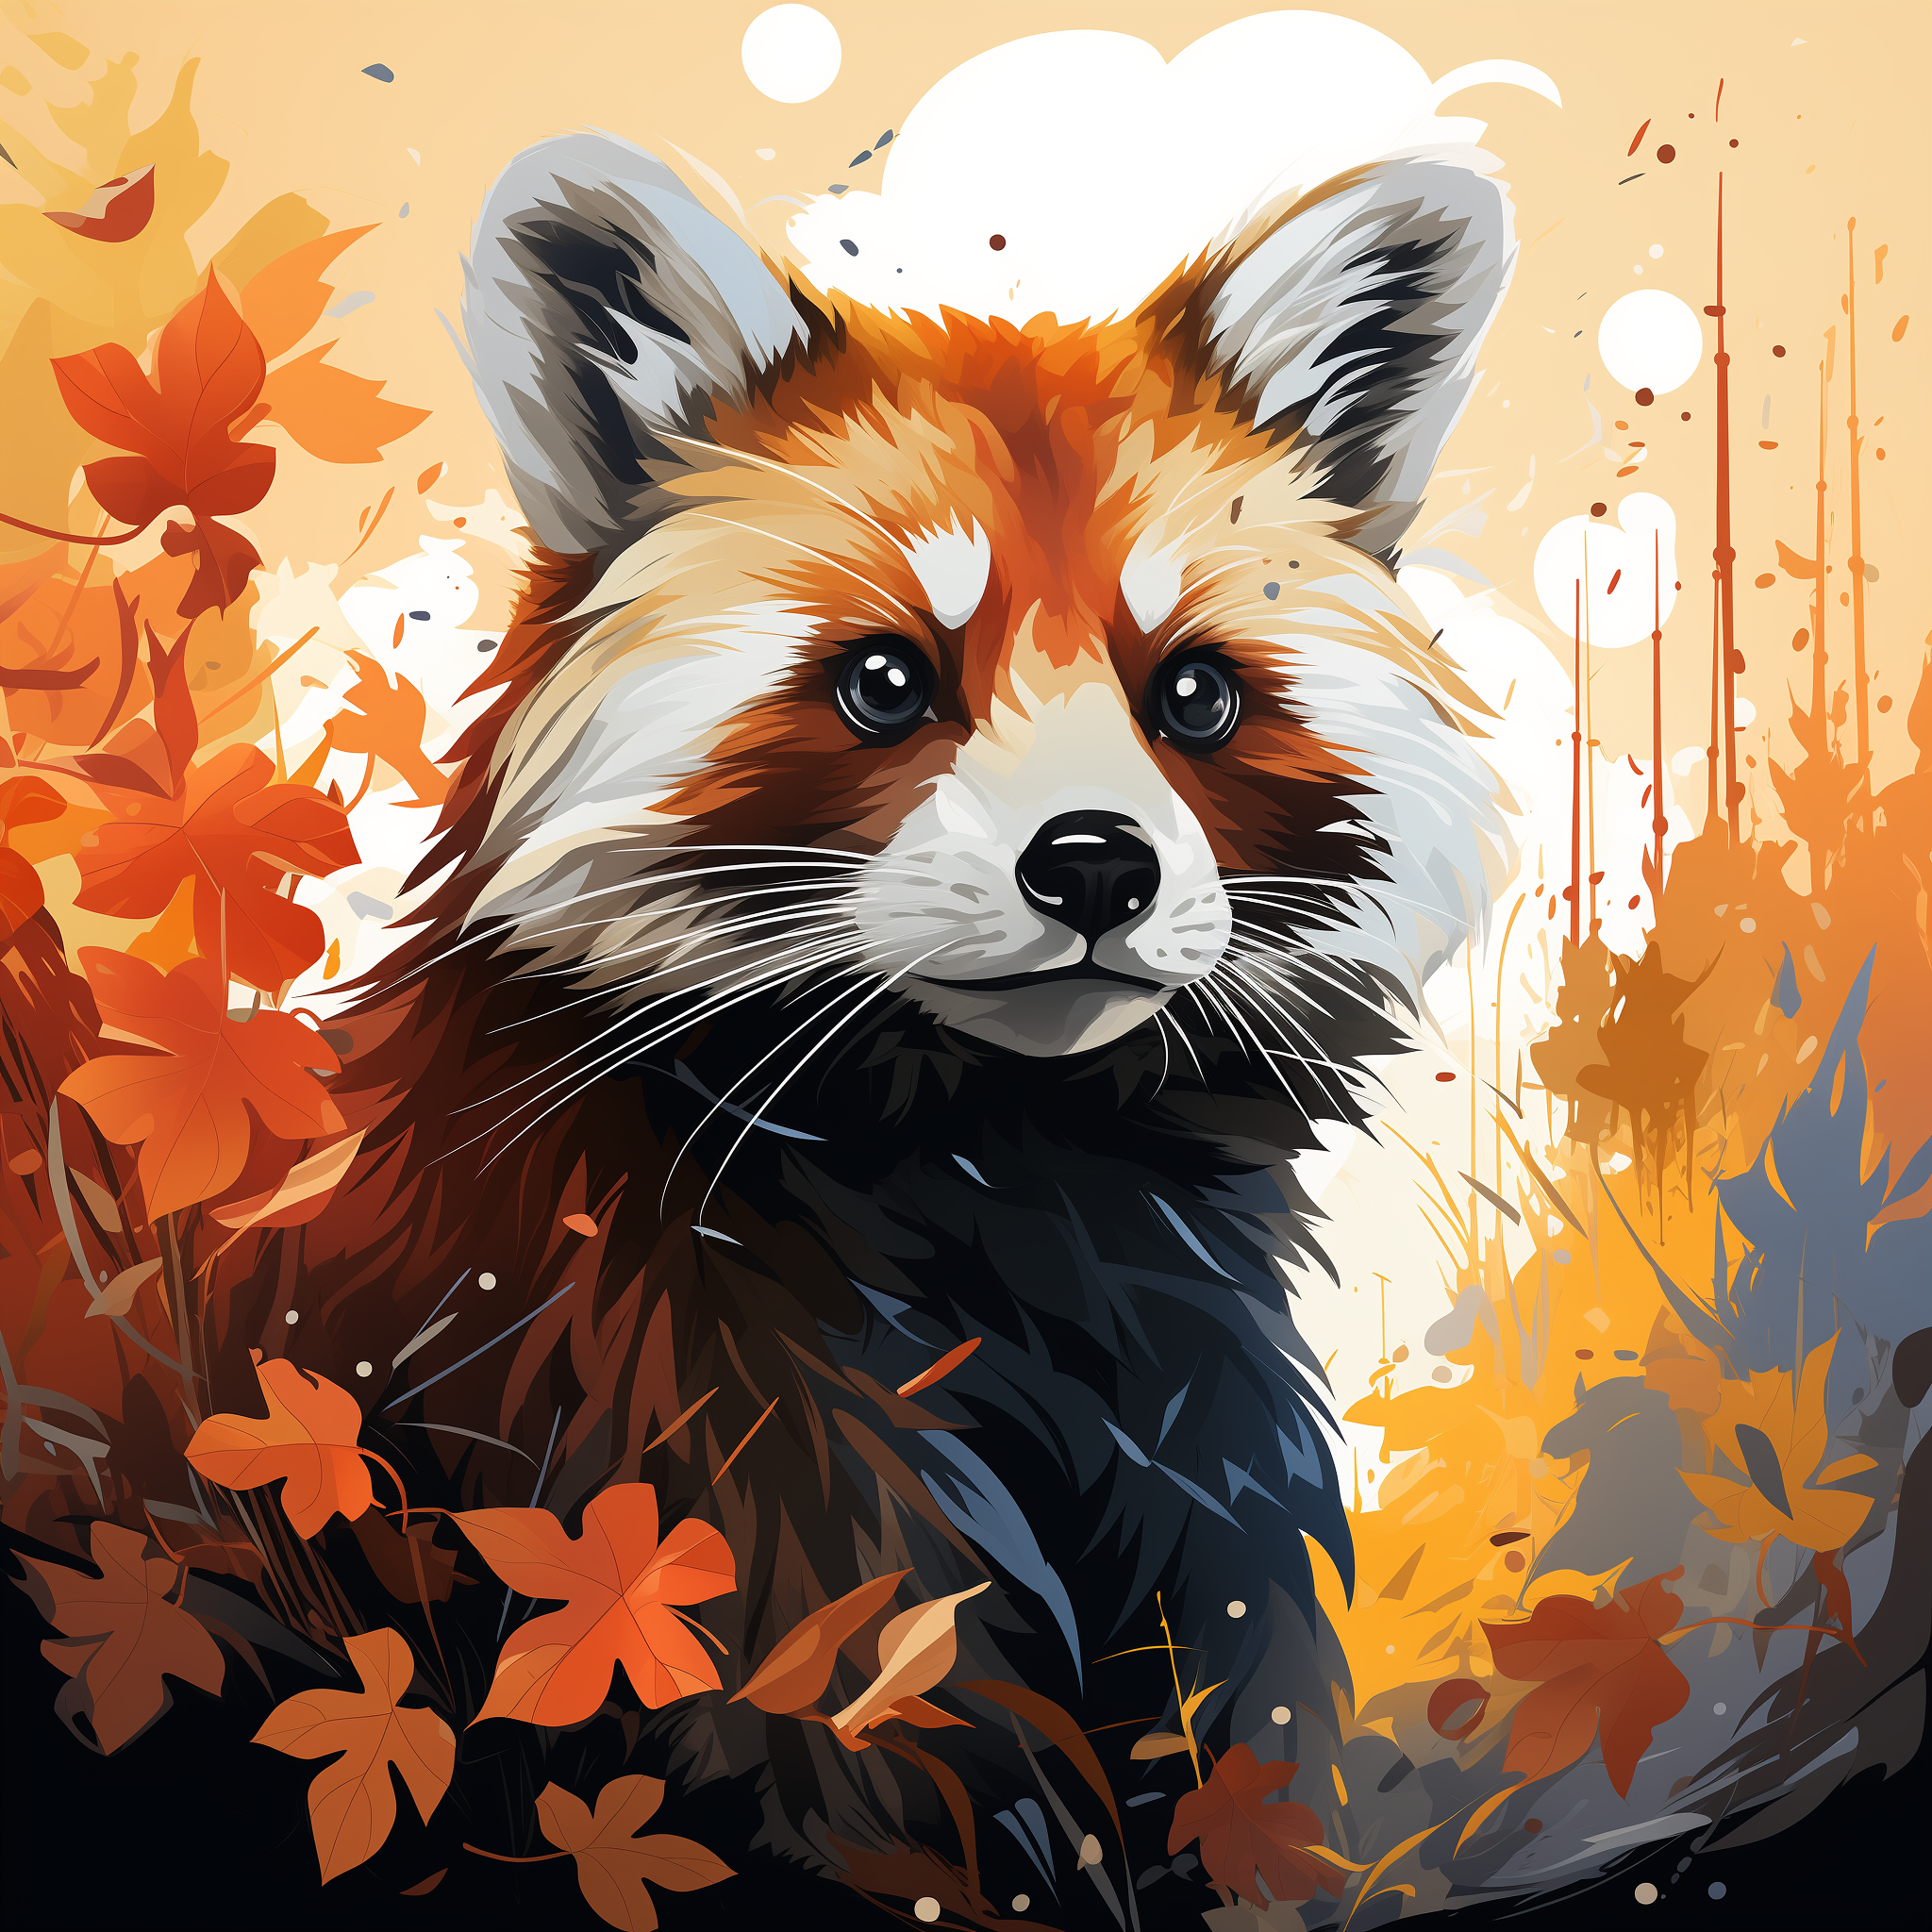 Illustration of a red panda avatar with vibrant autumn leaves in the background, perfect for use as a profile picture or pfp.